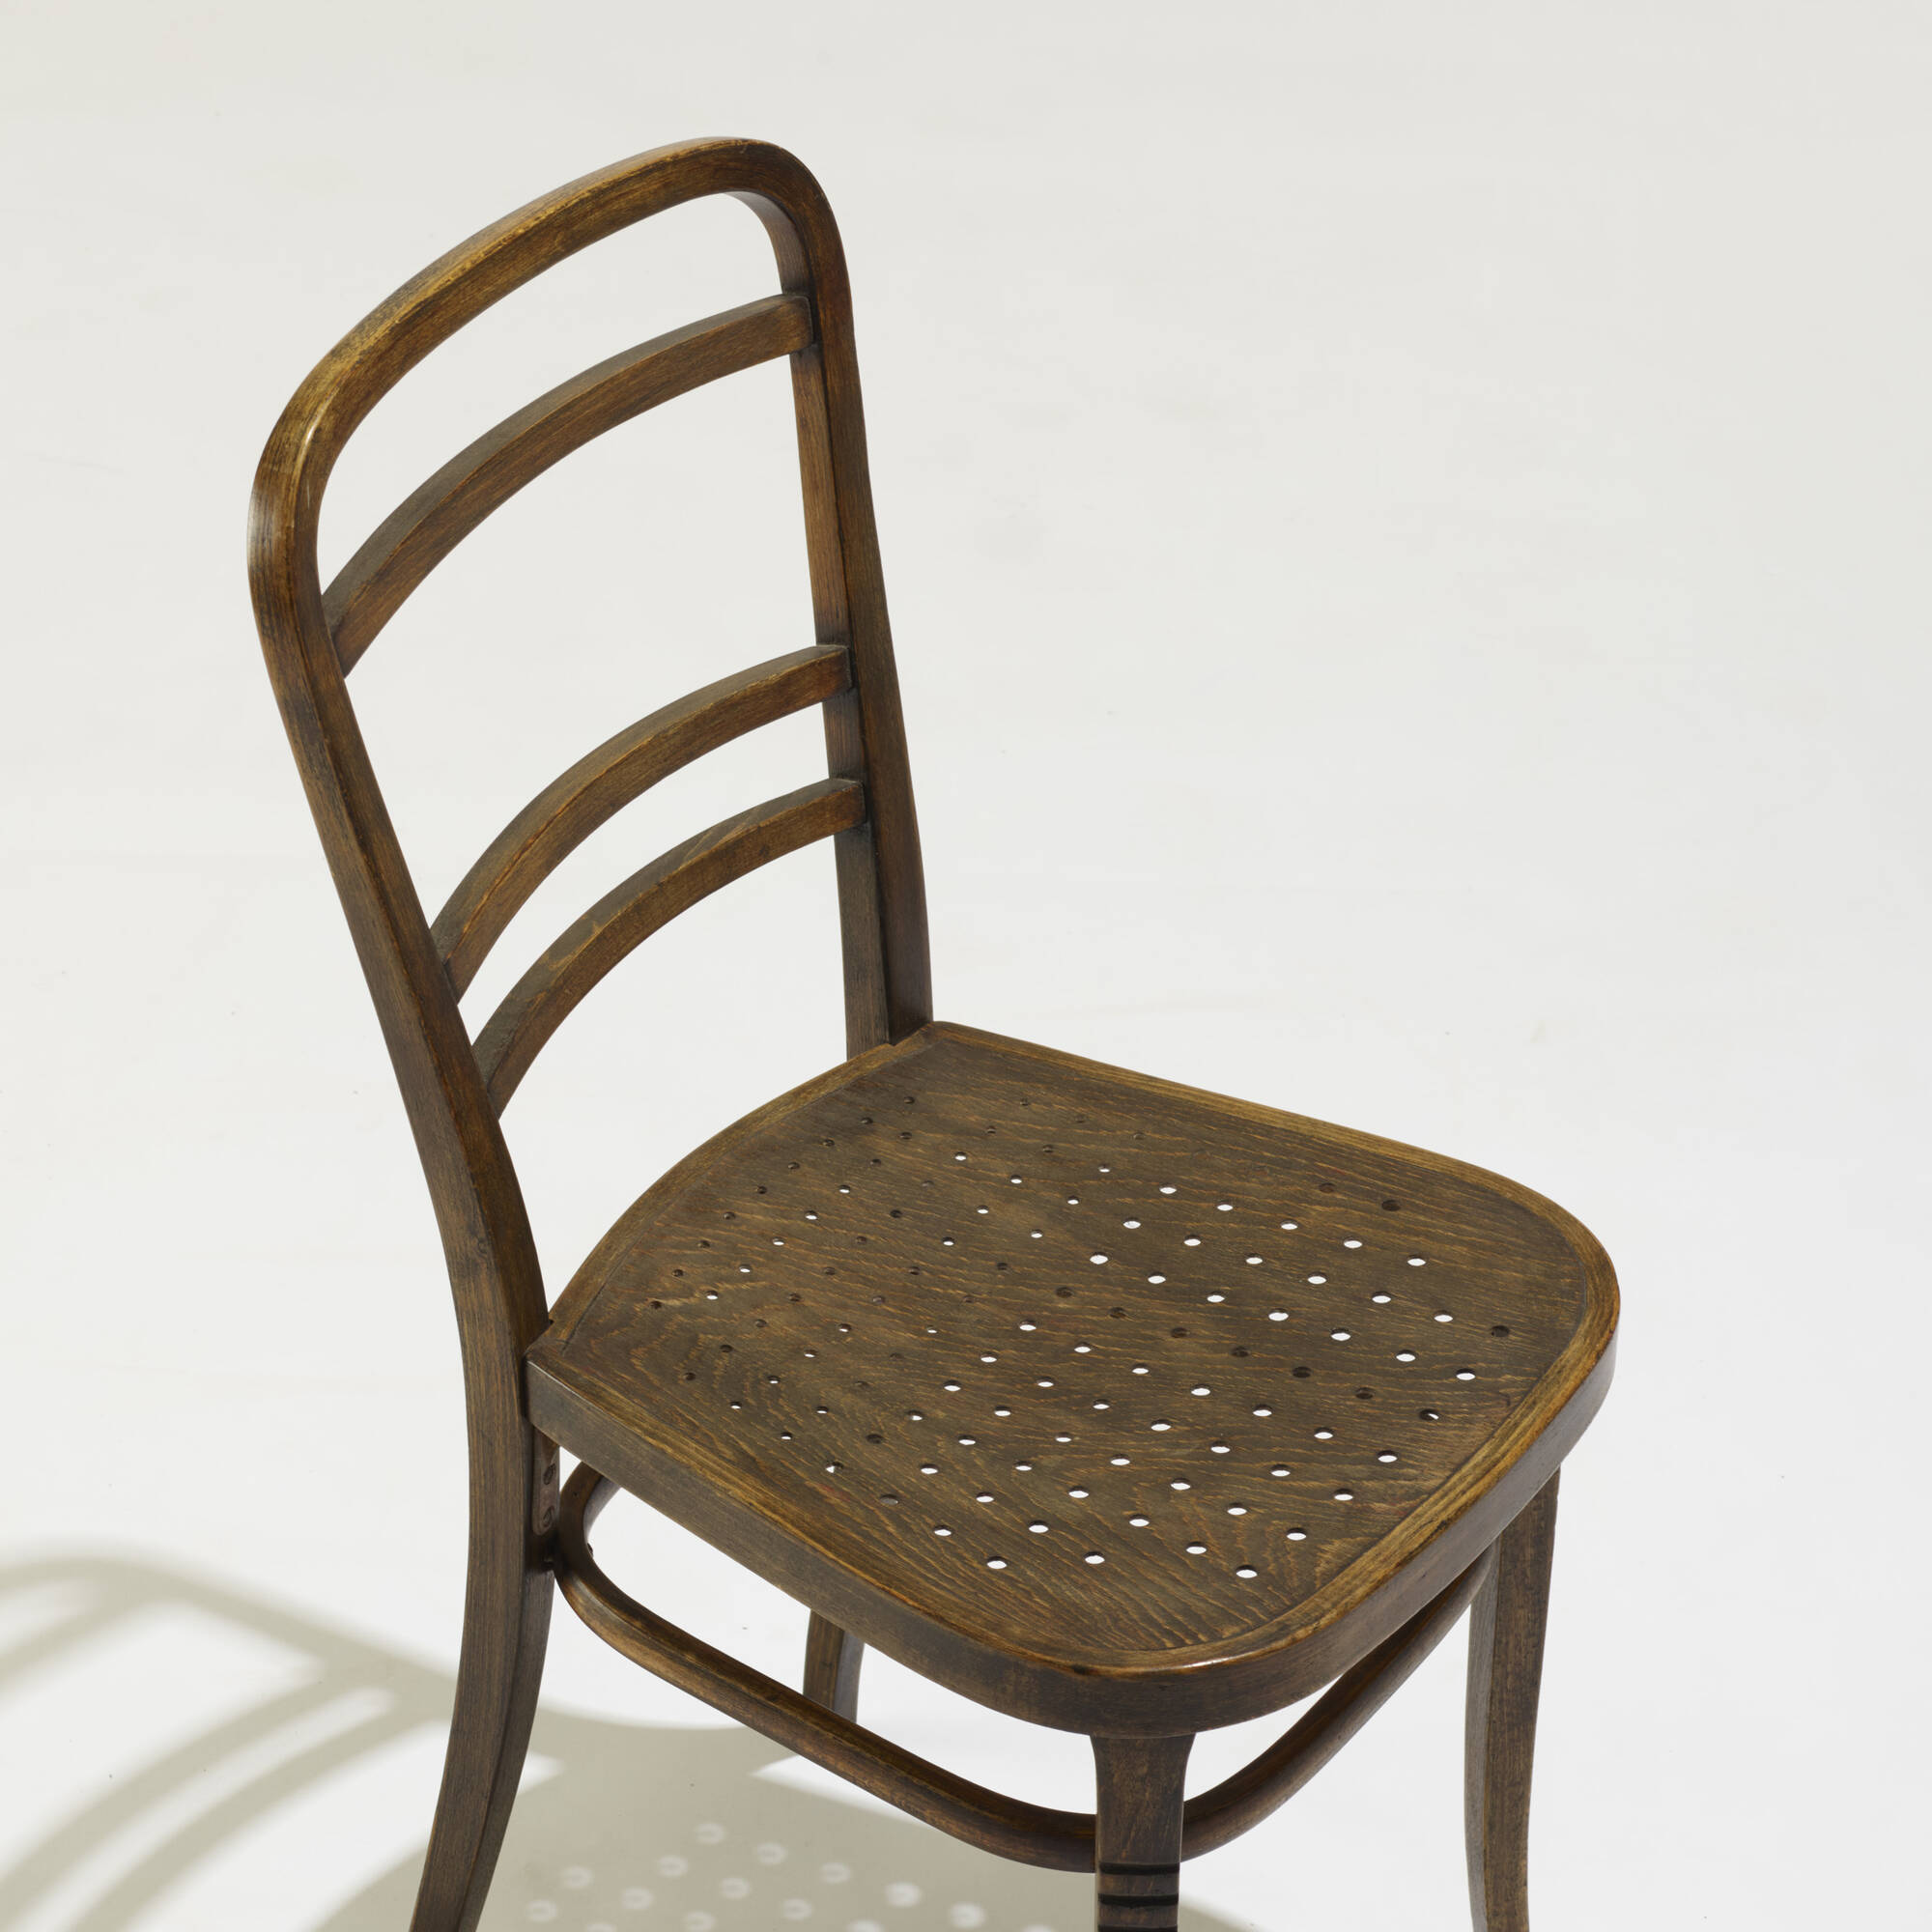 kiezen Productief kleding 156: OTTO WAGNER, chairs from the Postal Savings Bank, Vienna, pair <  International Style: The Boyd Collection, 7 November 2019 < Auctions |  Wright: Auctions of Art and Design